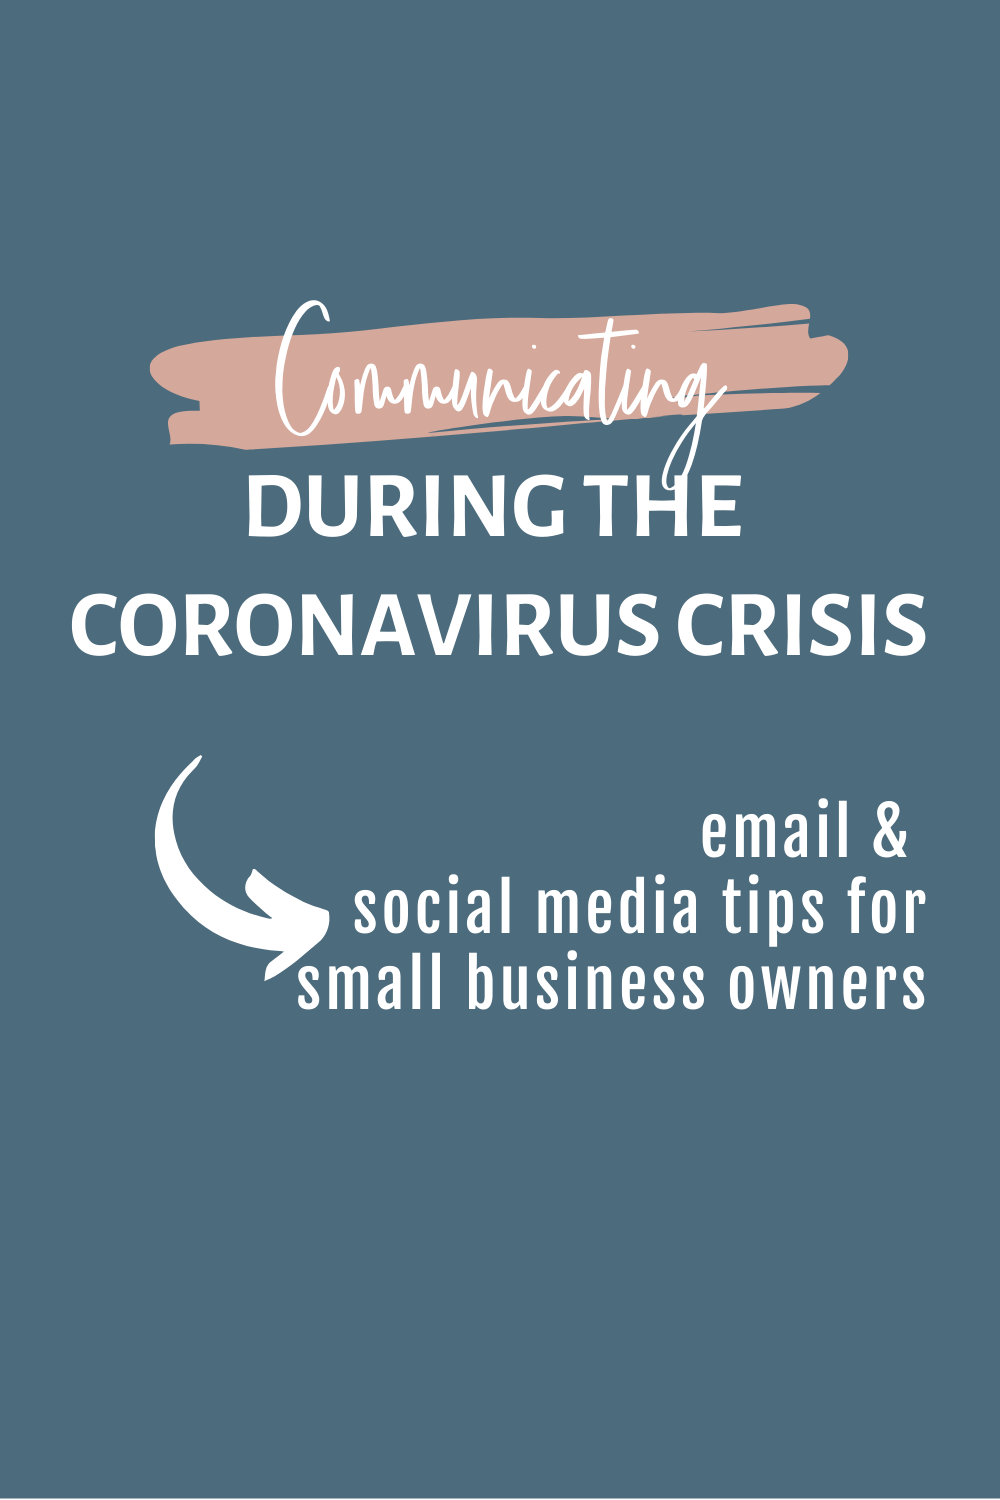 email and social media tips for communicating during the coronavirus crisis